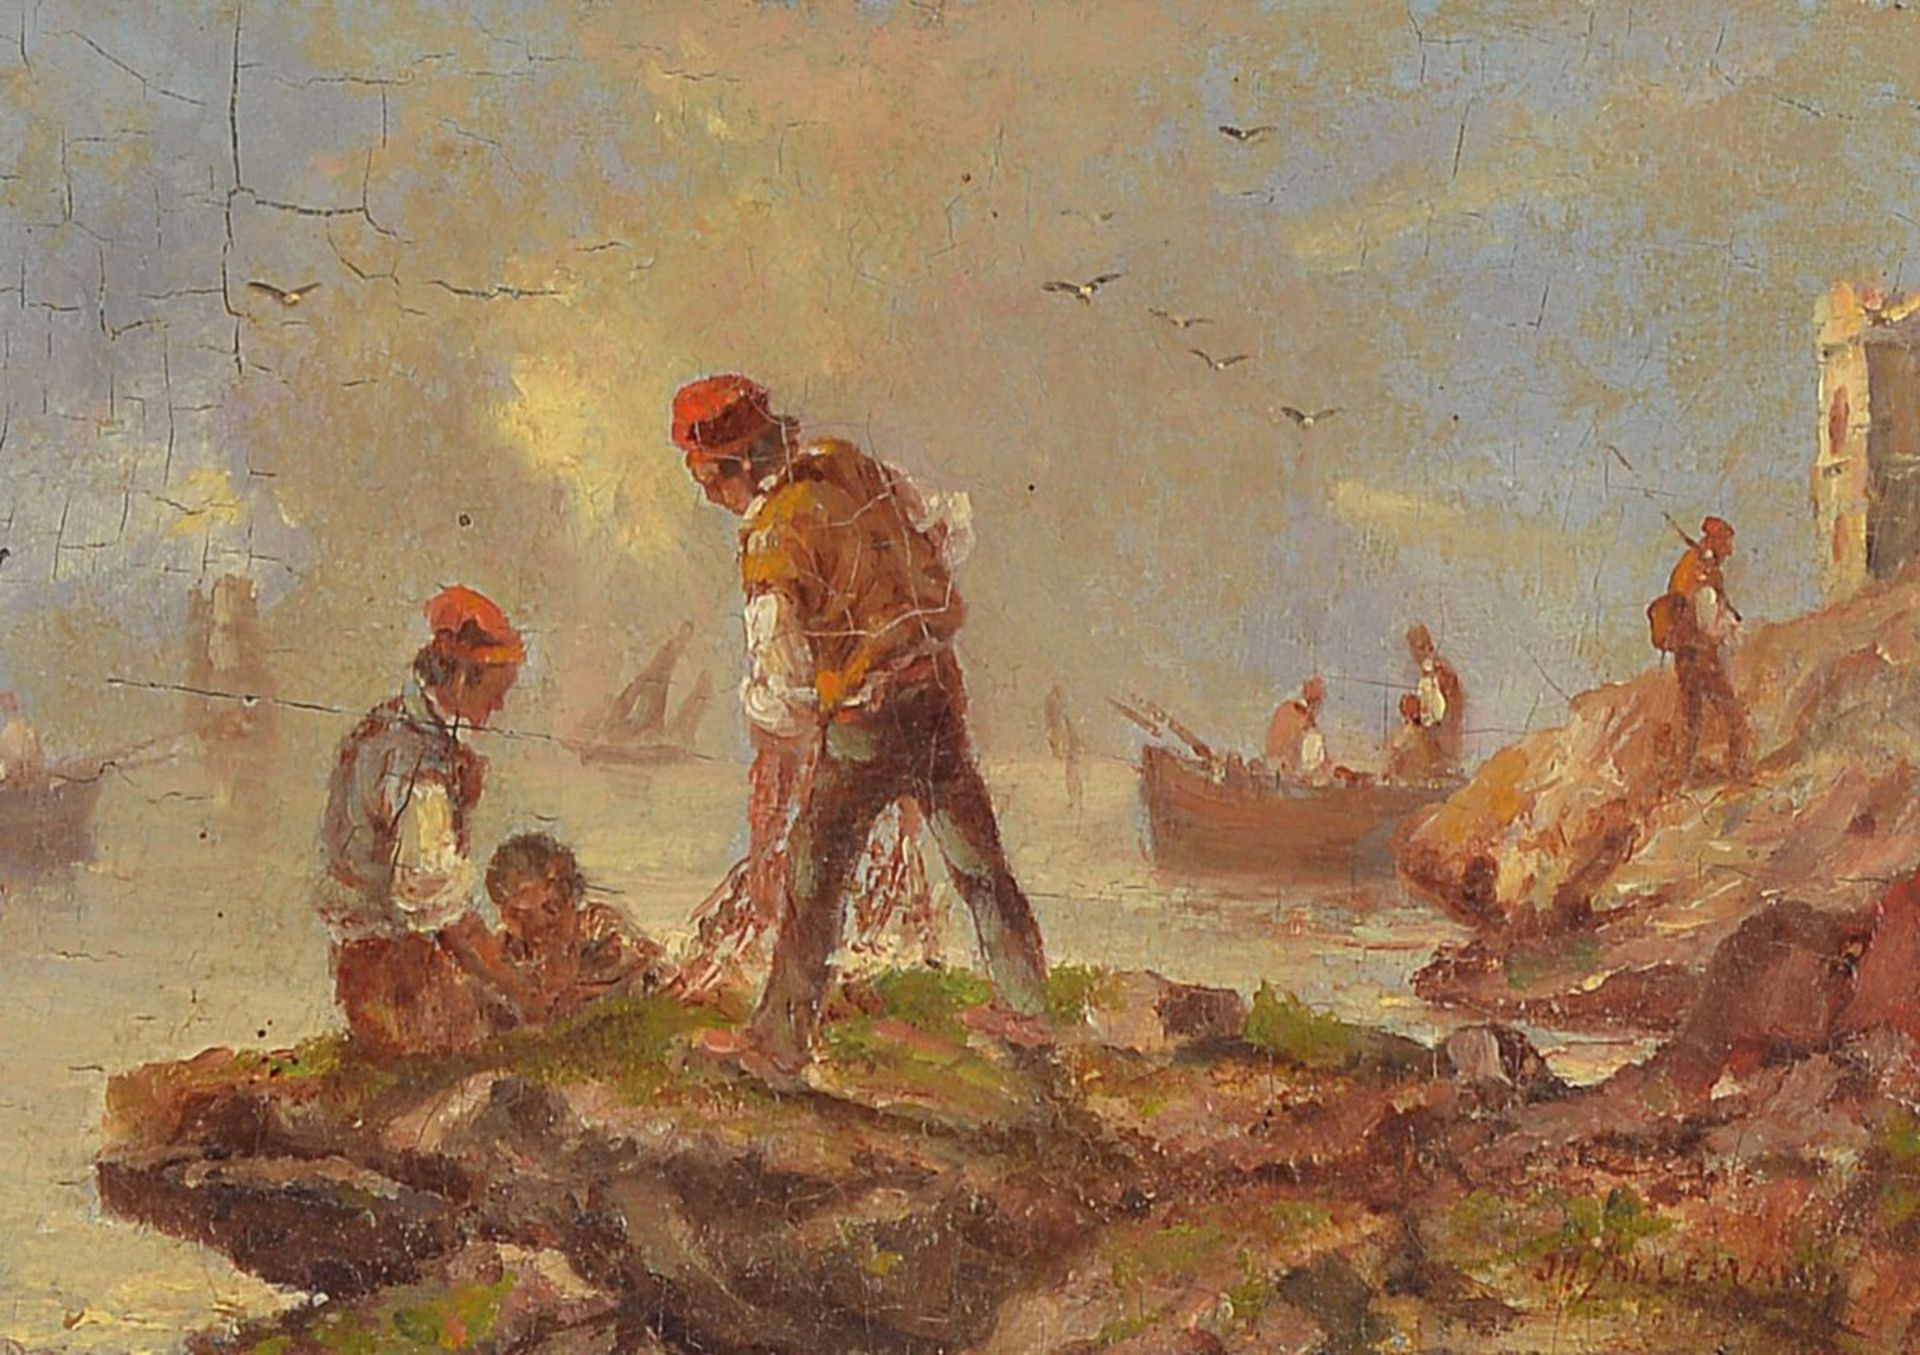 J. H. Allemand, painter of the 19th century, fishermen on a rocky beach, oil / wood, signedlower